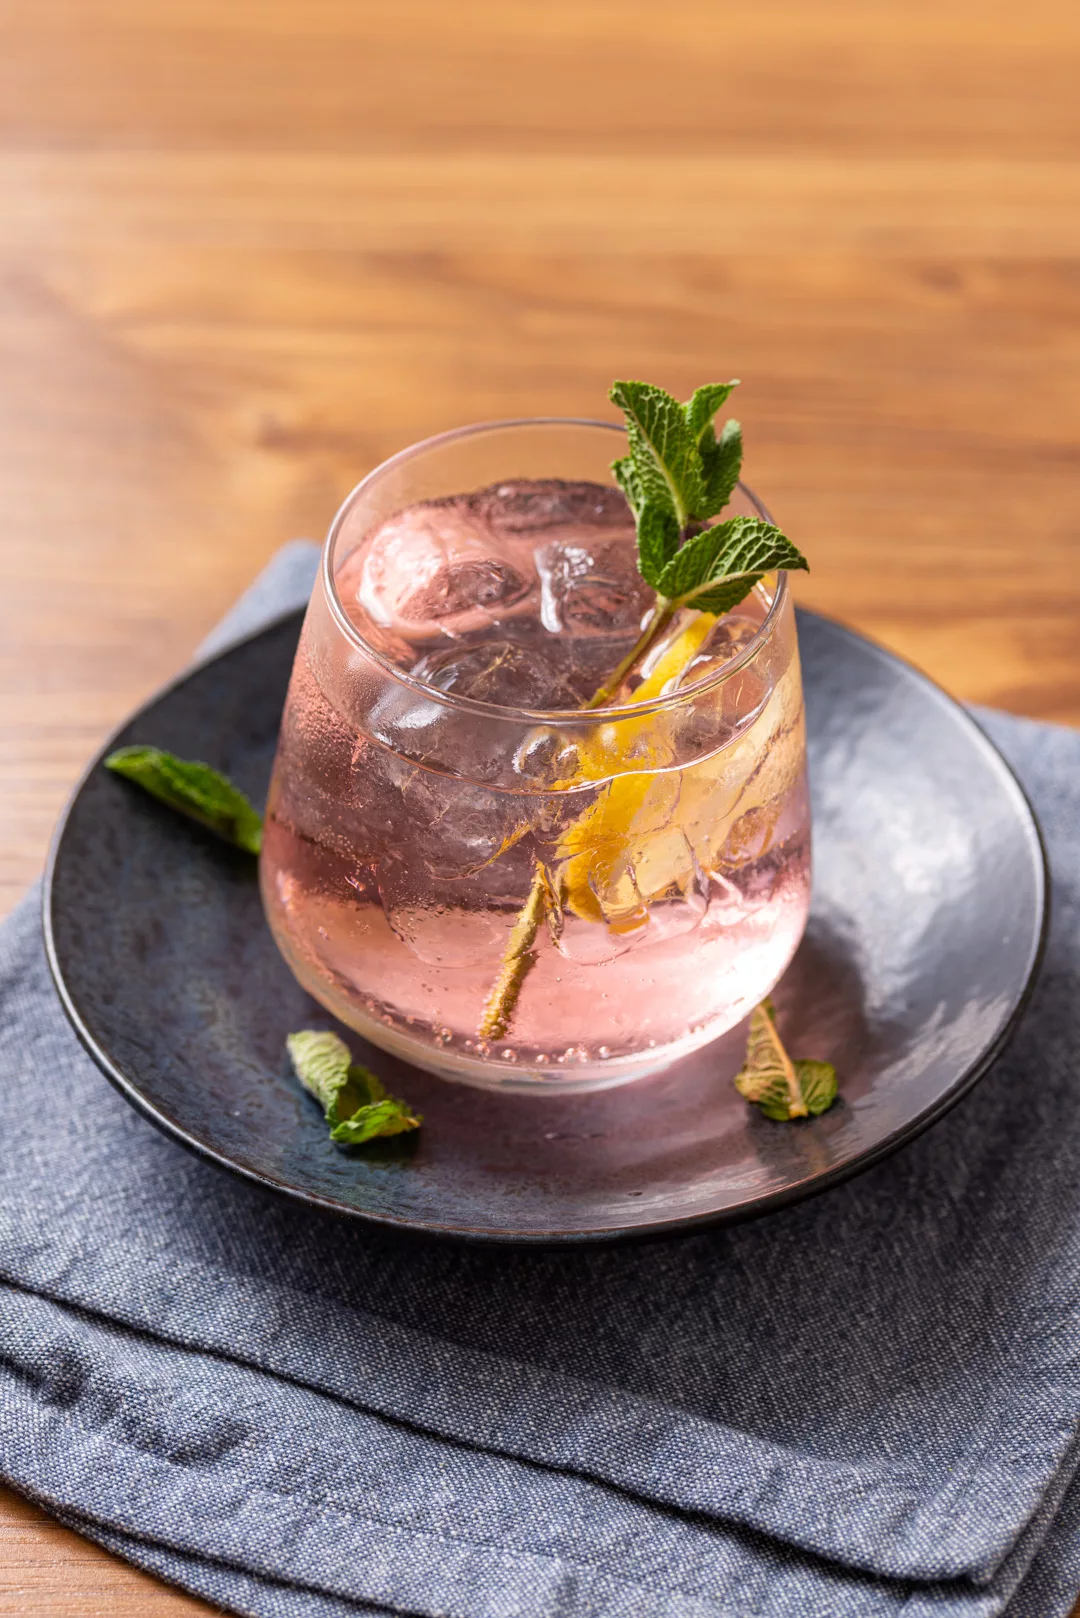 a pink whitney drink with mint and lemon round